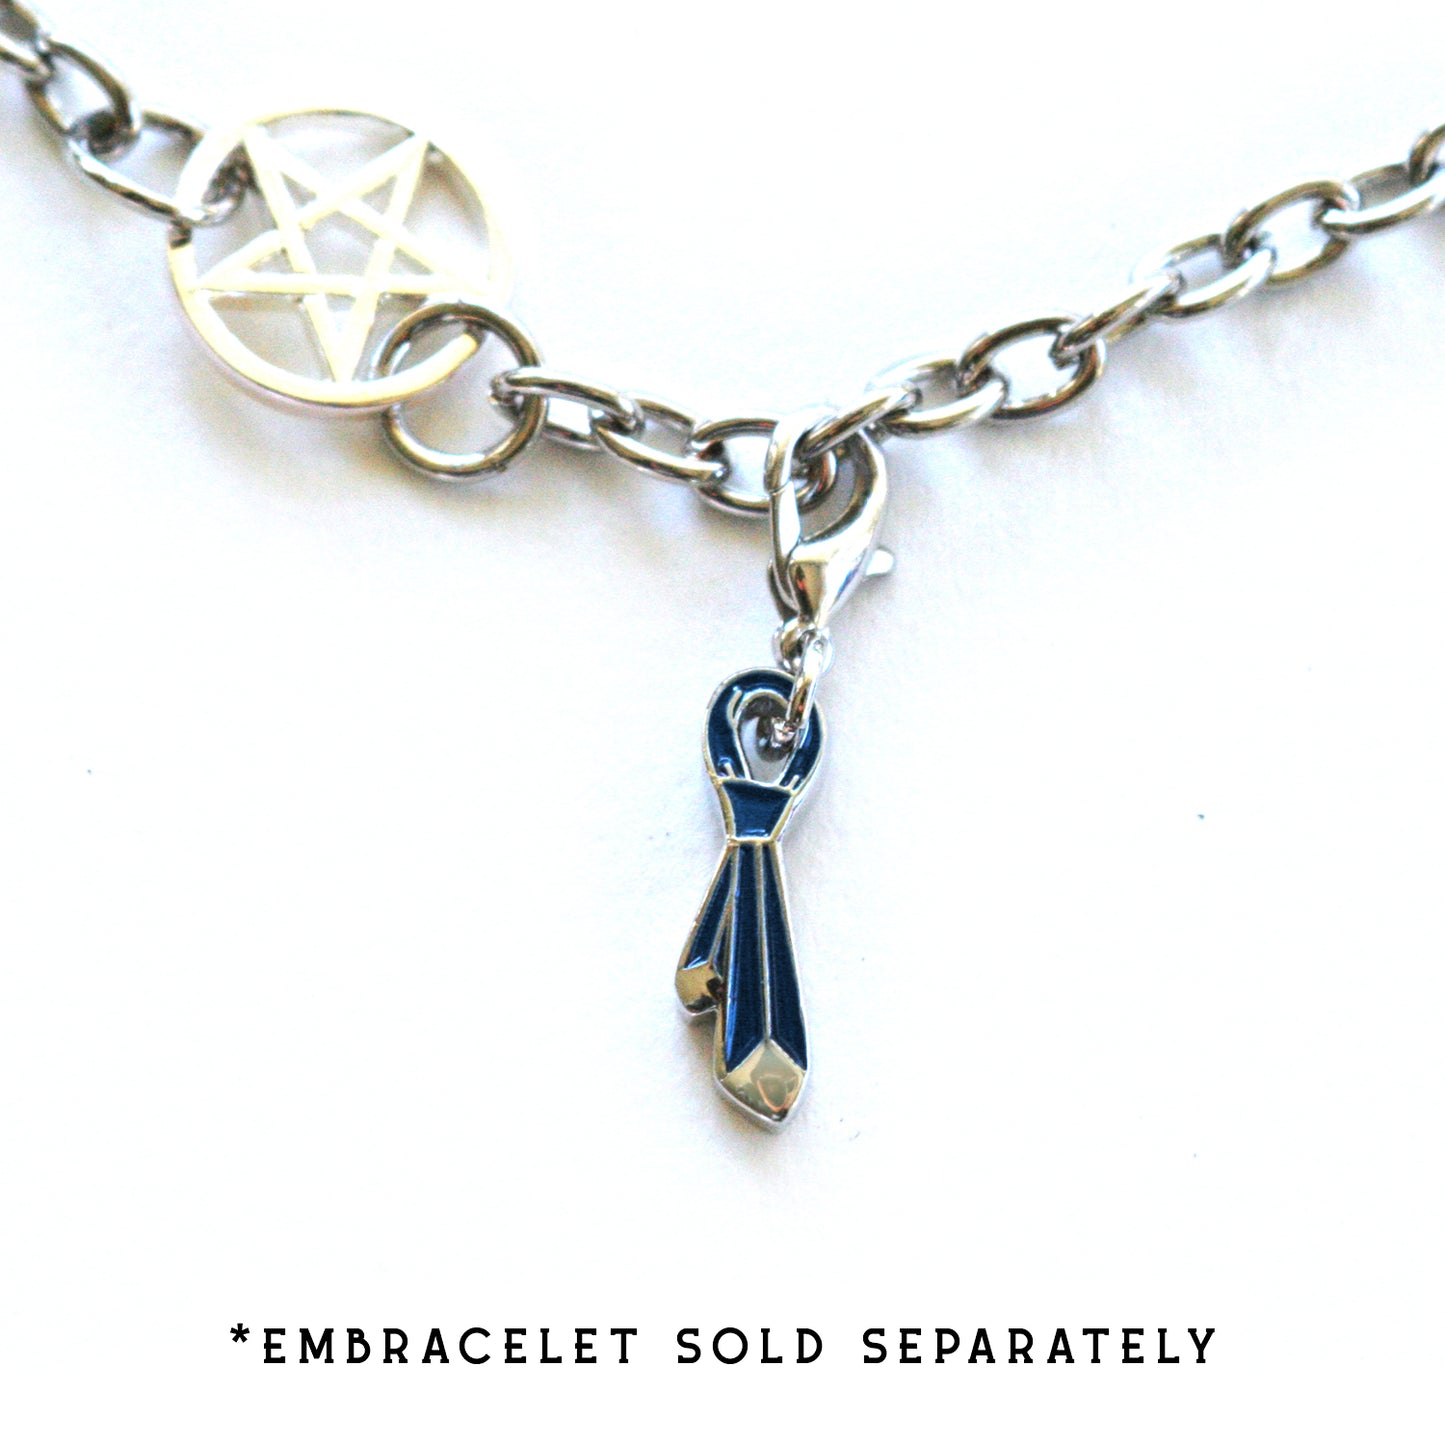 A silver charm in the shape of a backwards tie with a tiny clasp attached to a bracelet with "embracelet sold separately."